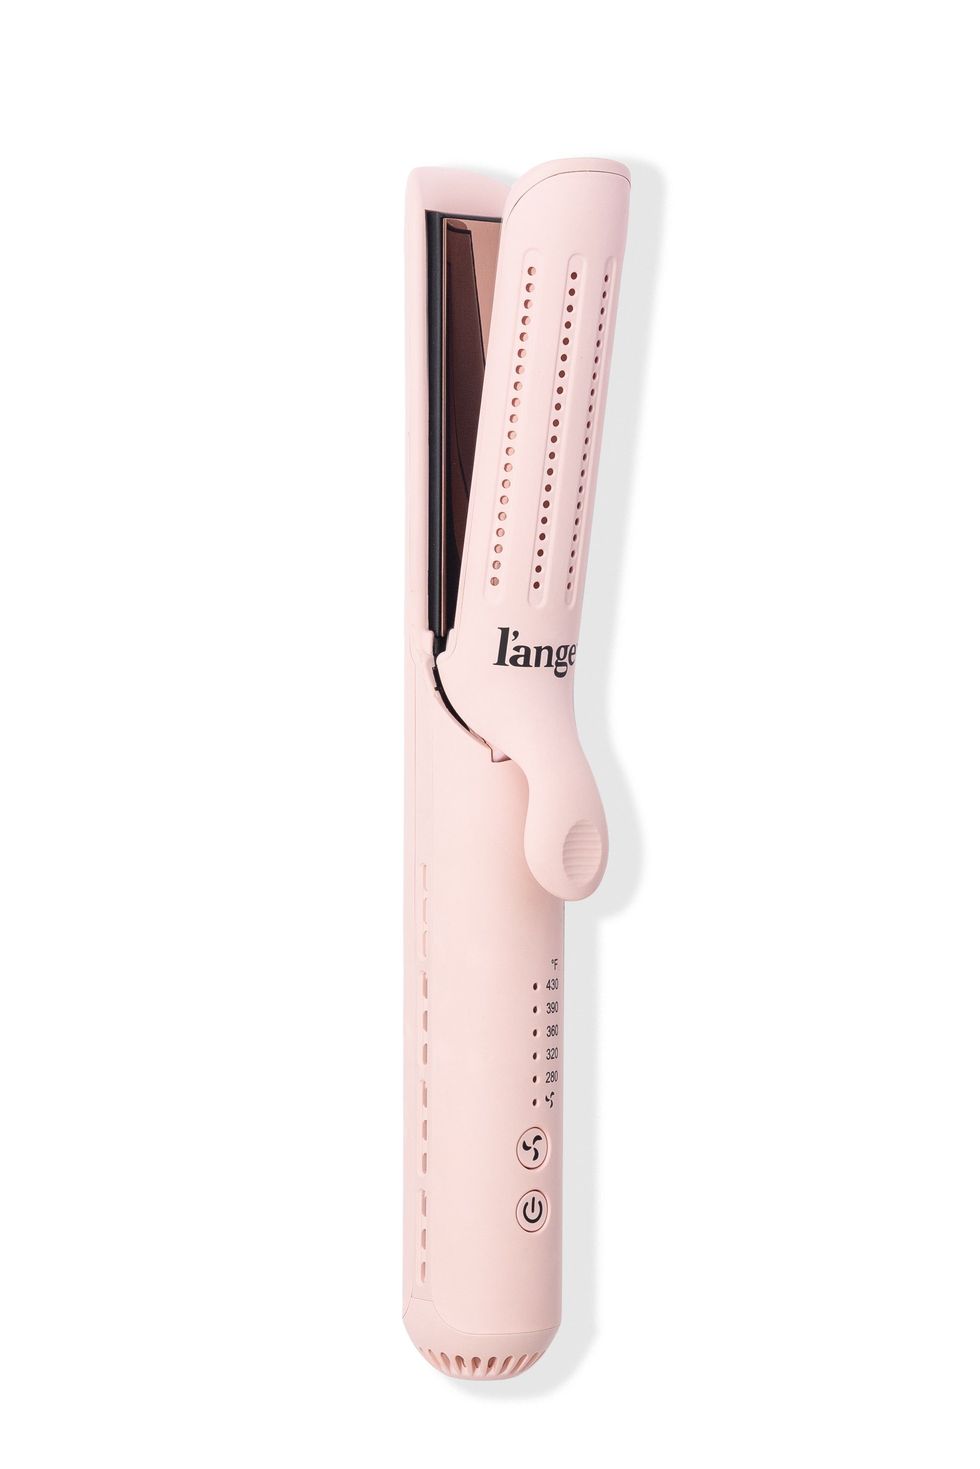 Le Duo 360 Airflow Styler